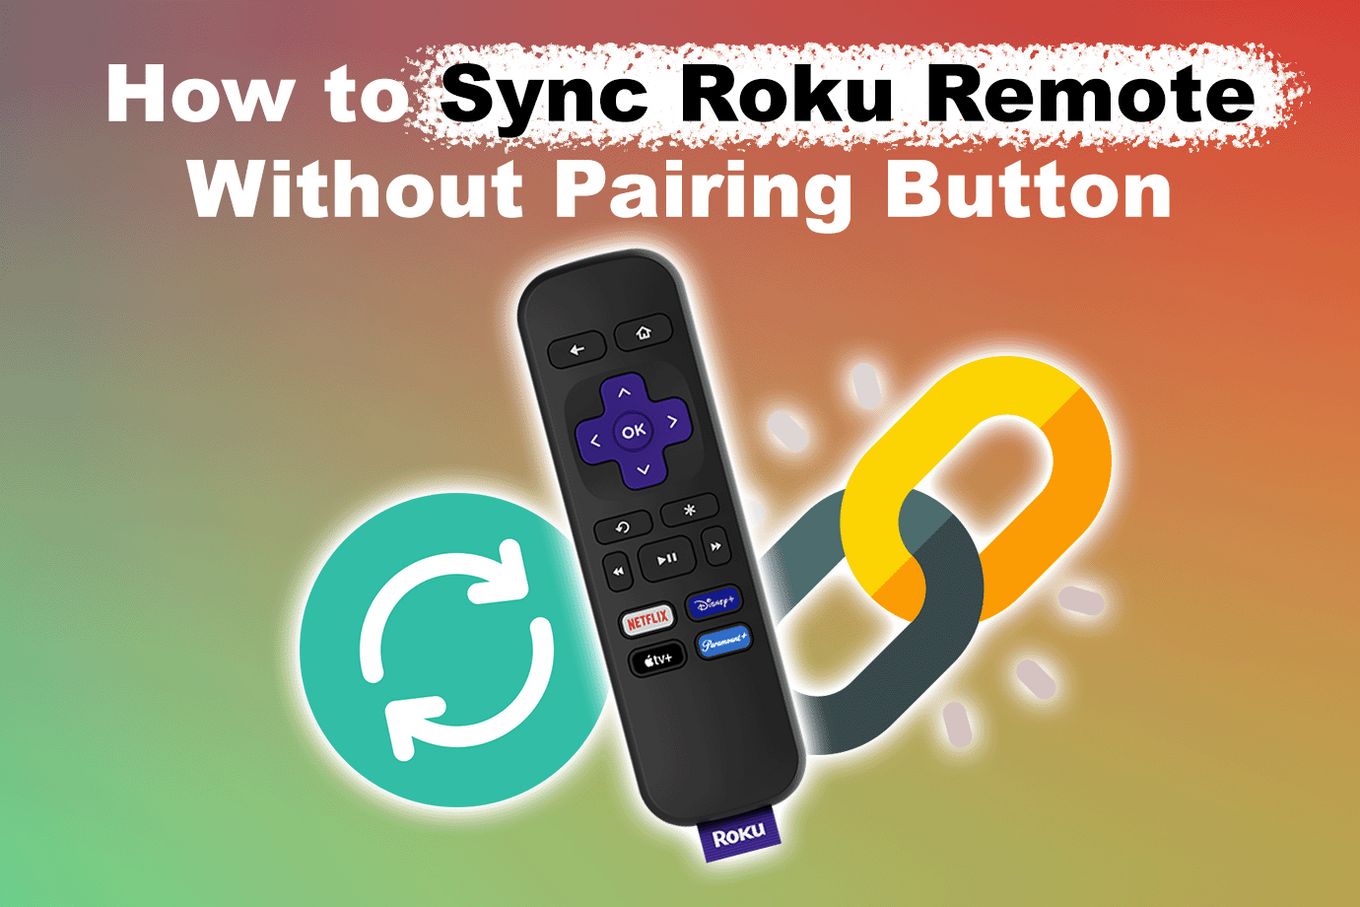 How to sync Roku Remote without pairing button